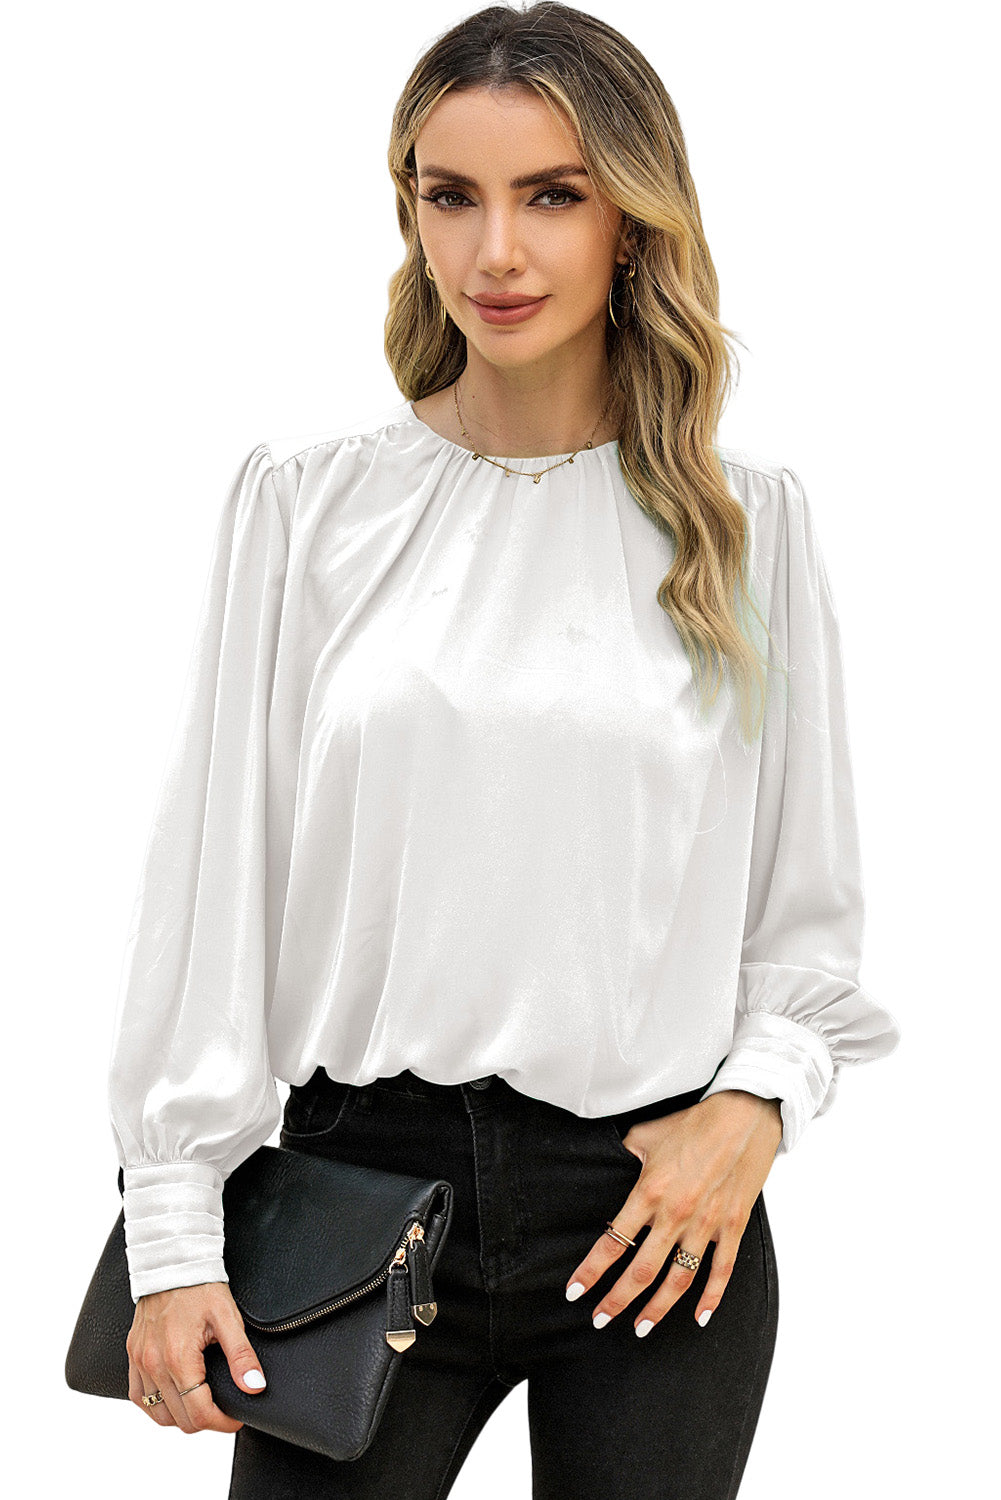 White Padded Shoulder Buttoned Cuffs Pleated Loose Blouse Tops & Tees JT's Designer Fashion